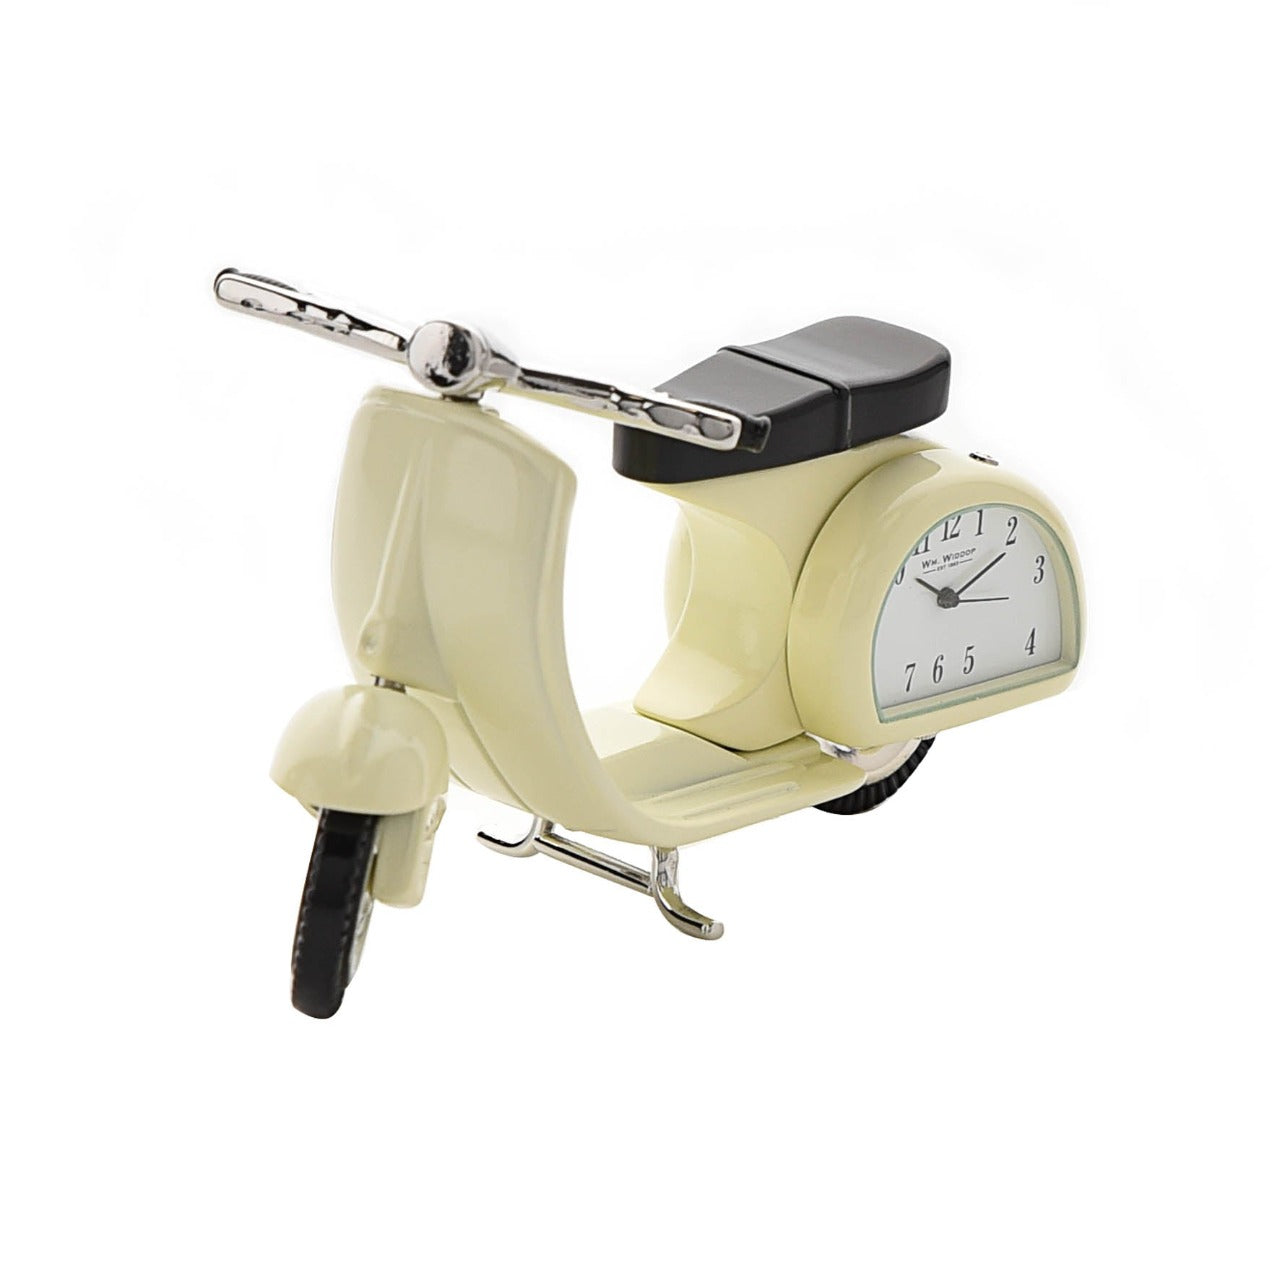 Miniature Clock Cream Vespa by William Widdop  Bring a unique and quirky touch to the home with this stylish miniature clock made with great attention to detail.  The miniature vespa clock is a great gift for someone who loves these iconic scooters.